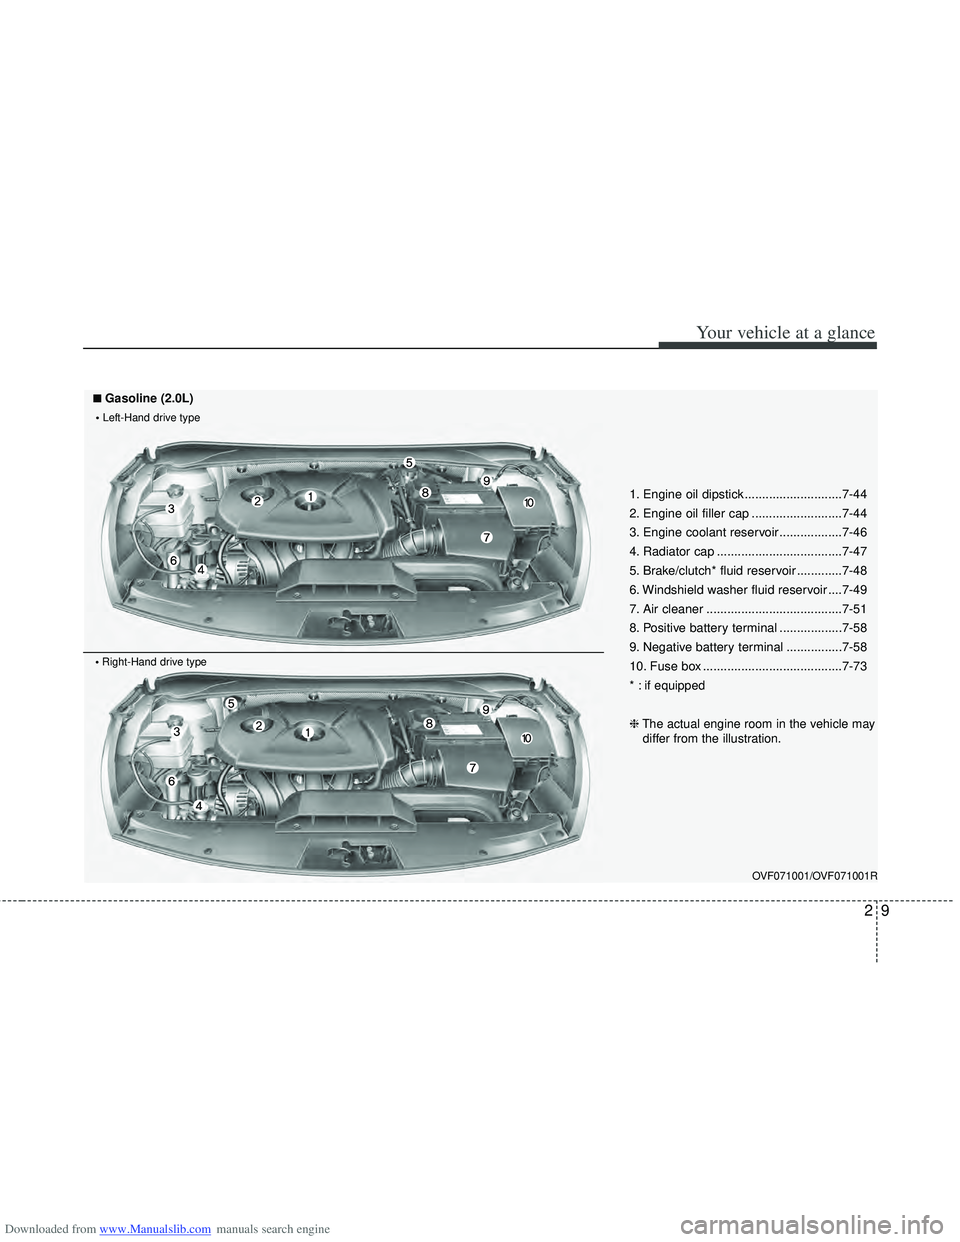 HYUNDAI I40 2015  Owners Manual Downloaded from www.Manualslib.com manuals search engine 29
Your vehicle at a glance
OVF071001/OVF071001R
1. Engine oil dipstick ............................7-44
2. Engine oil filler cap .............